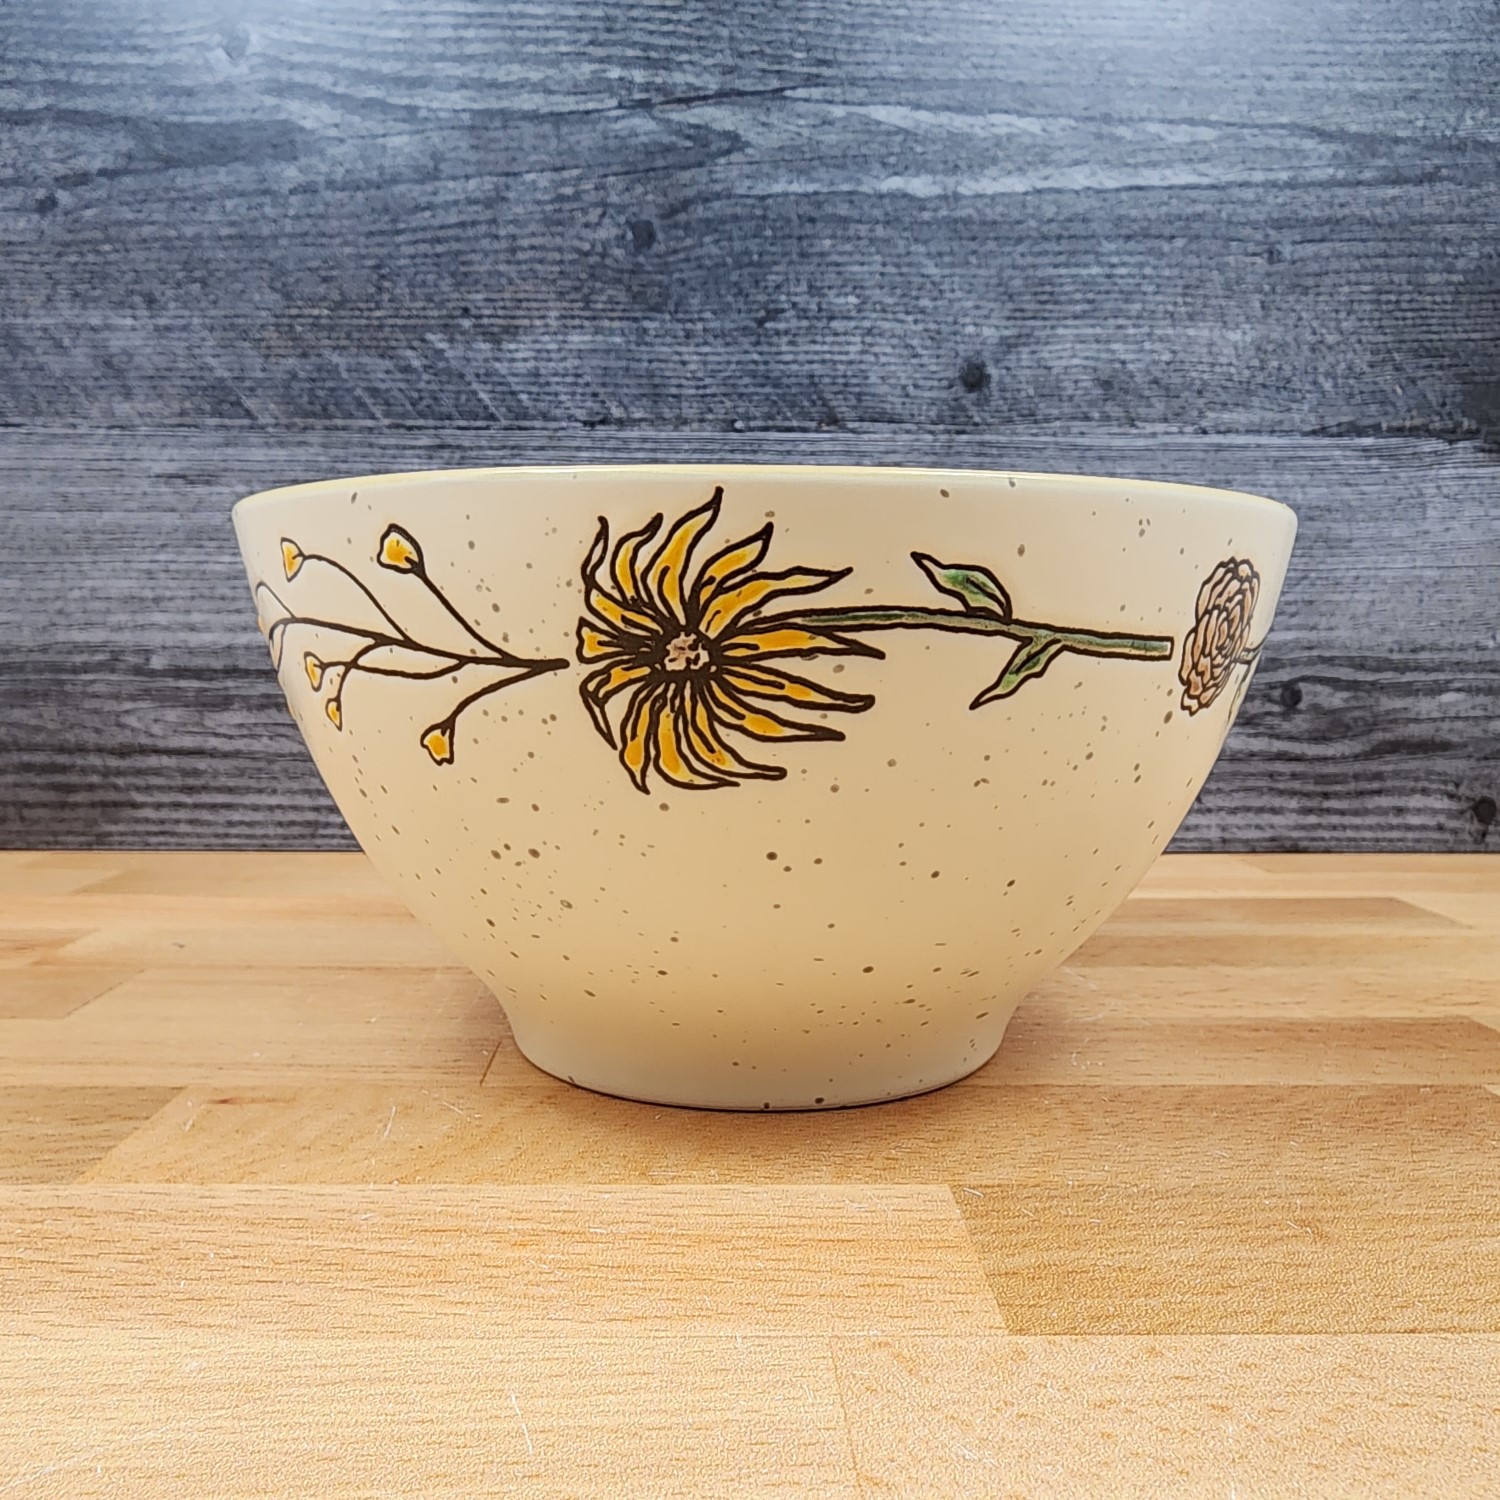 This Daisy Spring Flowers Festive Bowl 6 inch (15cm) Floral Dish by Blue Sky is made with love by Premier Homegoods! Shop more unique gift ideas today with Spots Initiatives, the best way to support creators.